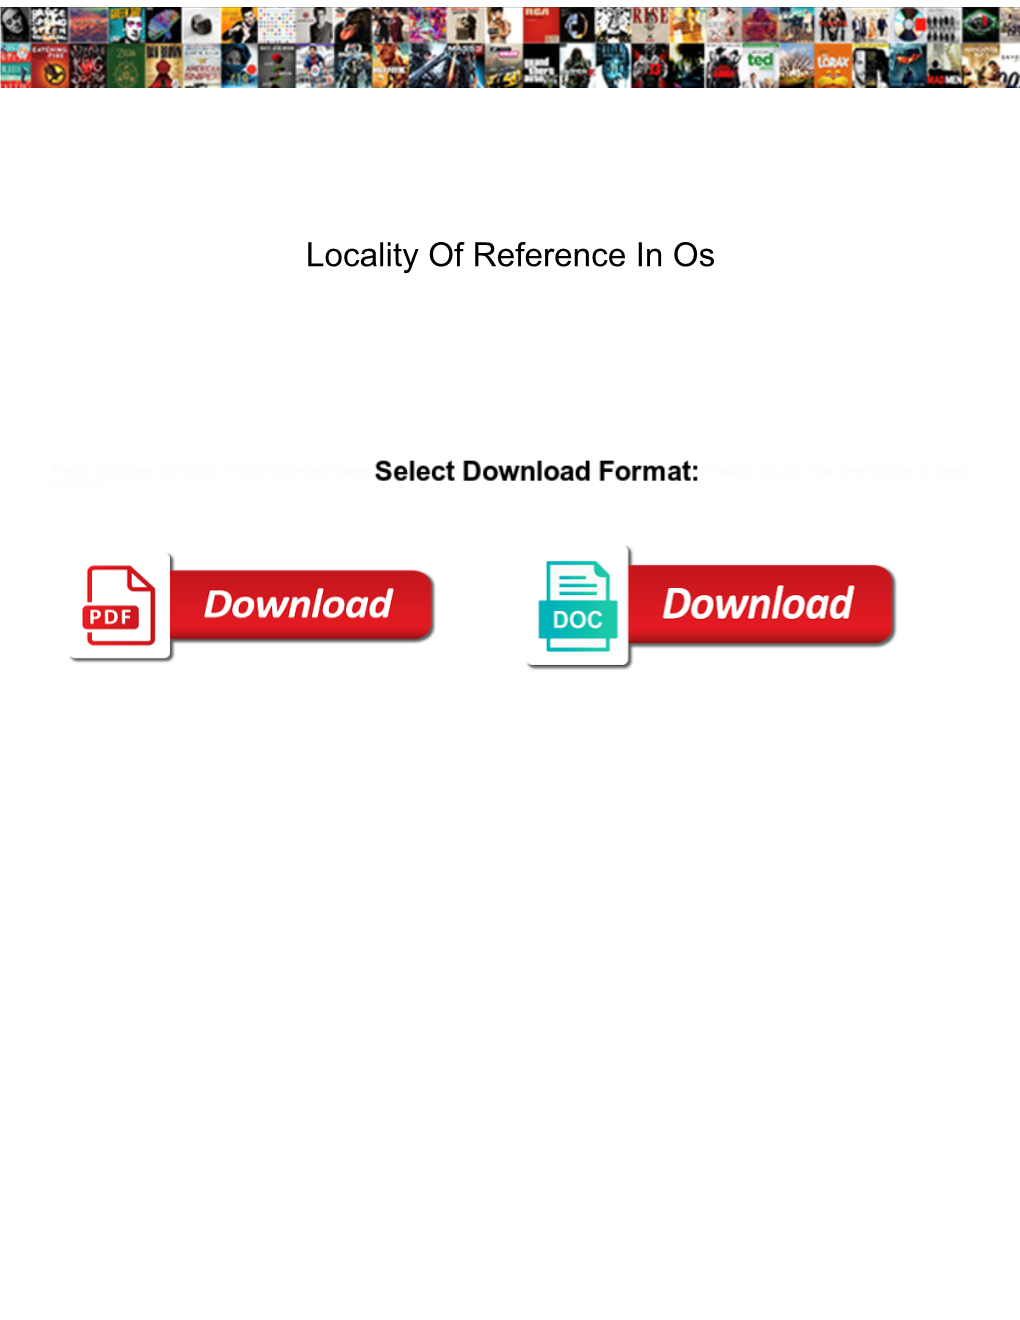 Locality of Reference in Os